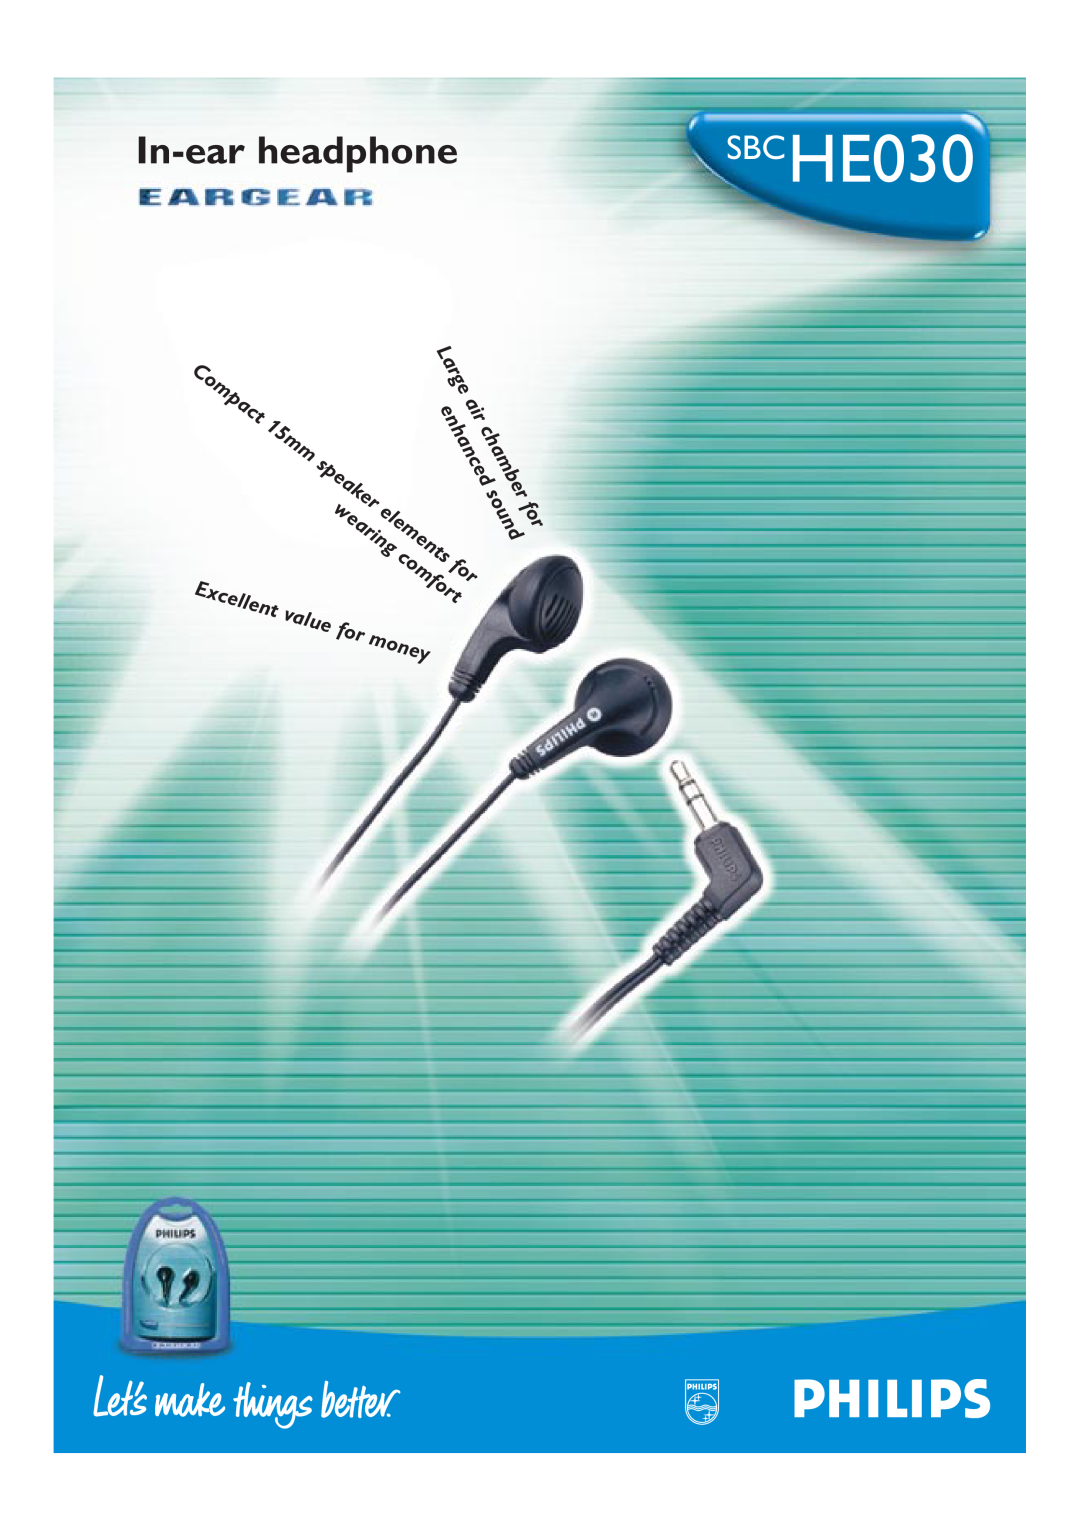 Philips SBCHE030 manual In-earheadphone, wearing, Large, soundfor, enhanced, Excellent, value, money, chamber, 15mm 